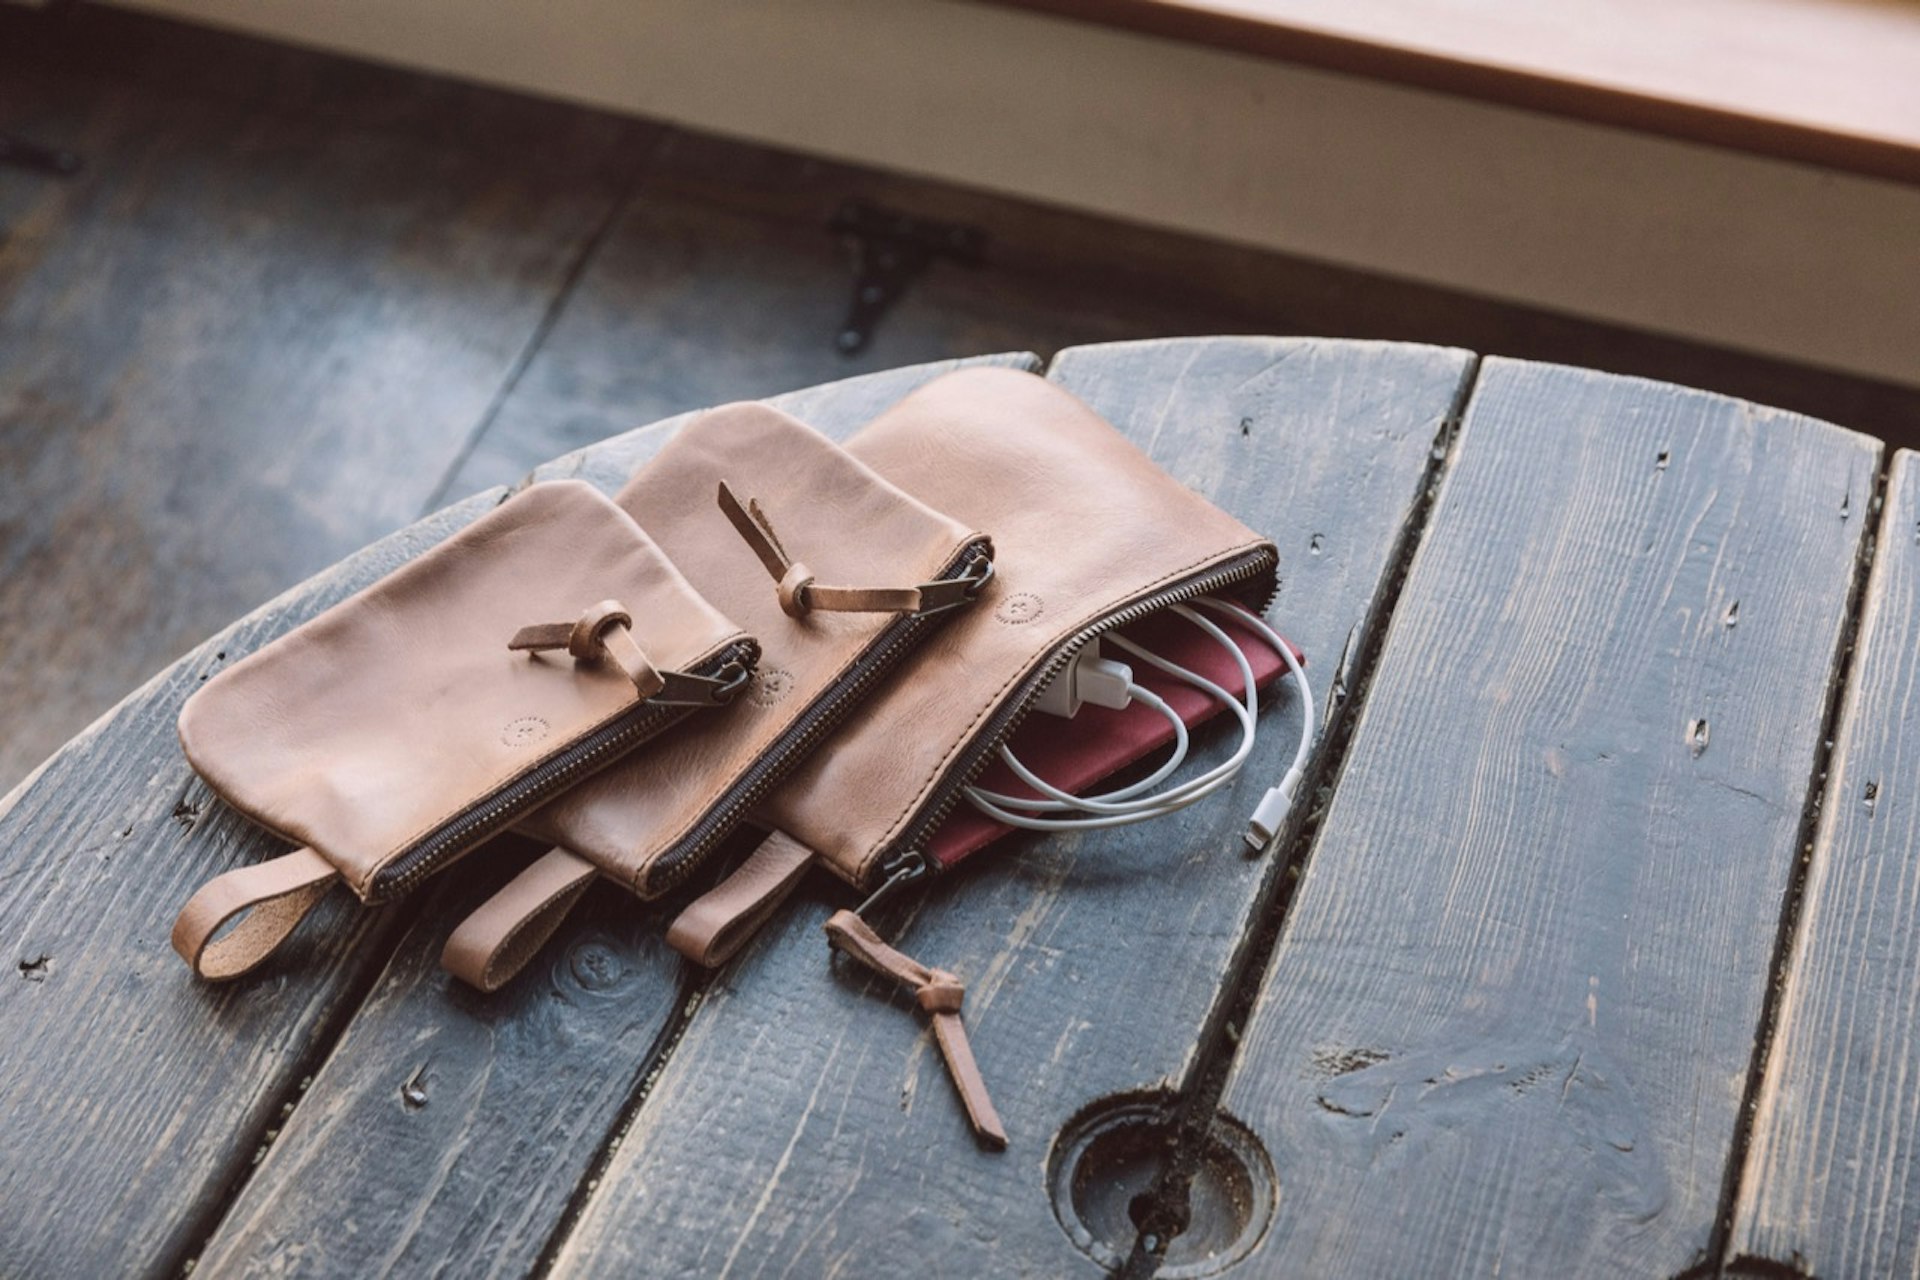 WP Standard pouches in tan, on a table - one open with charging cable and notebook showing